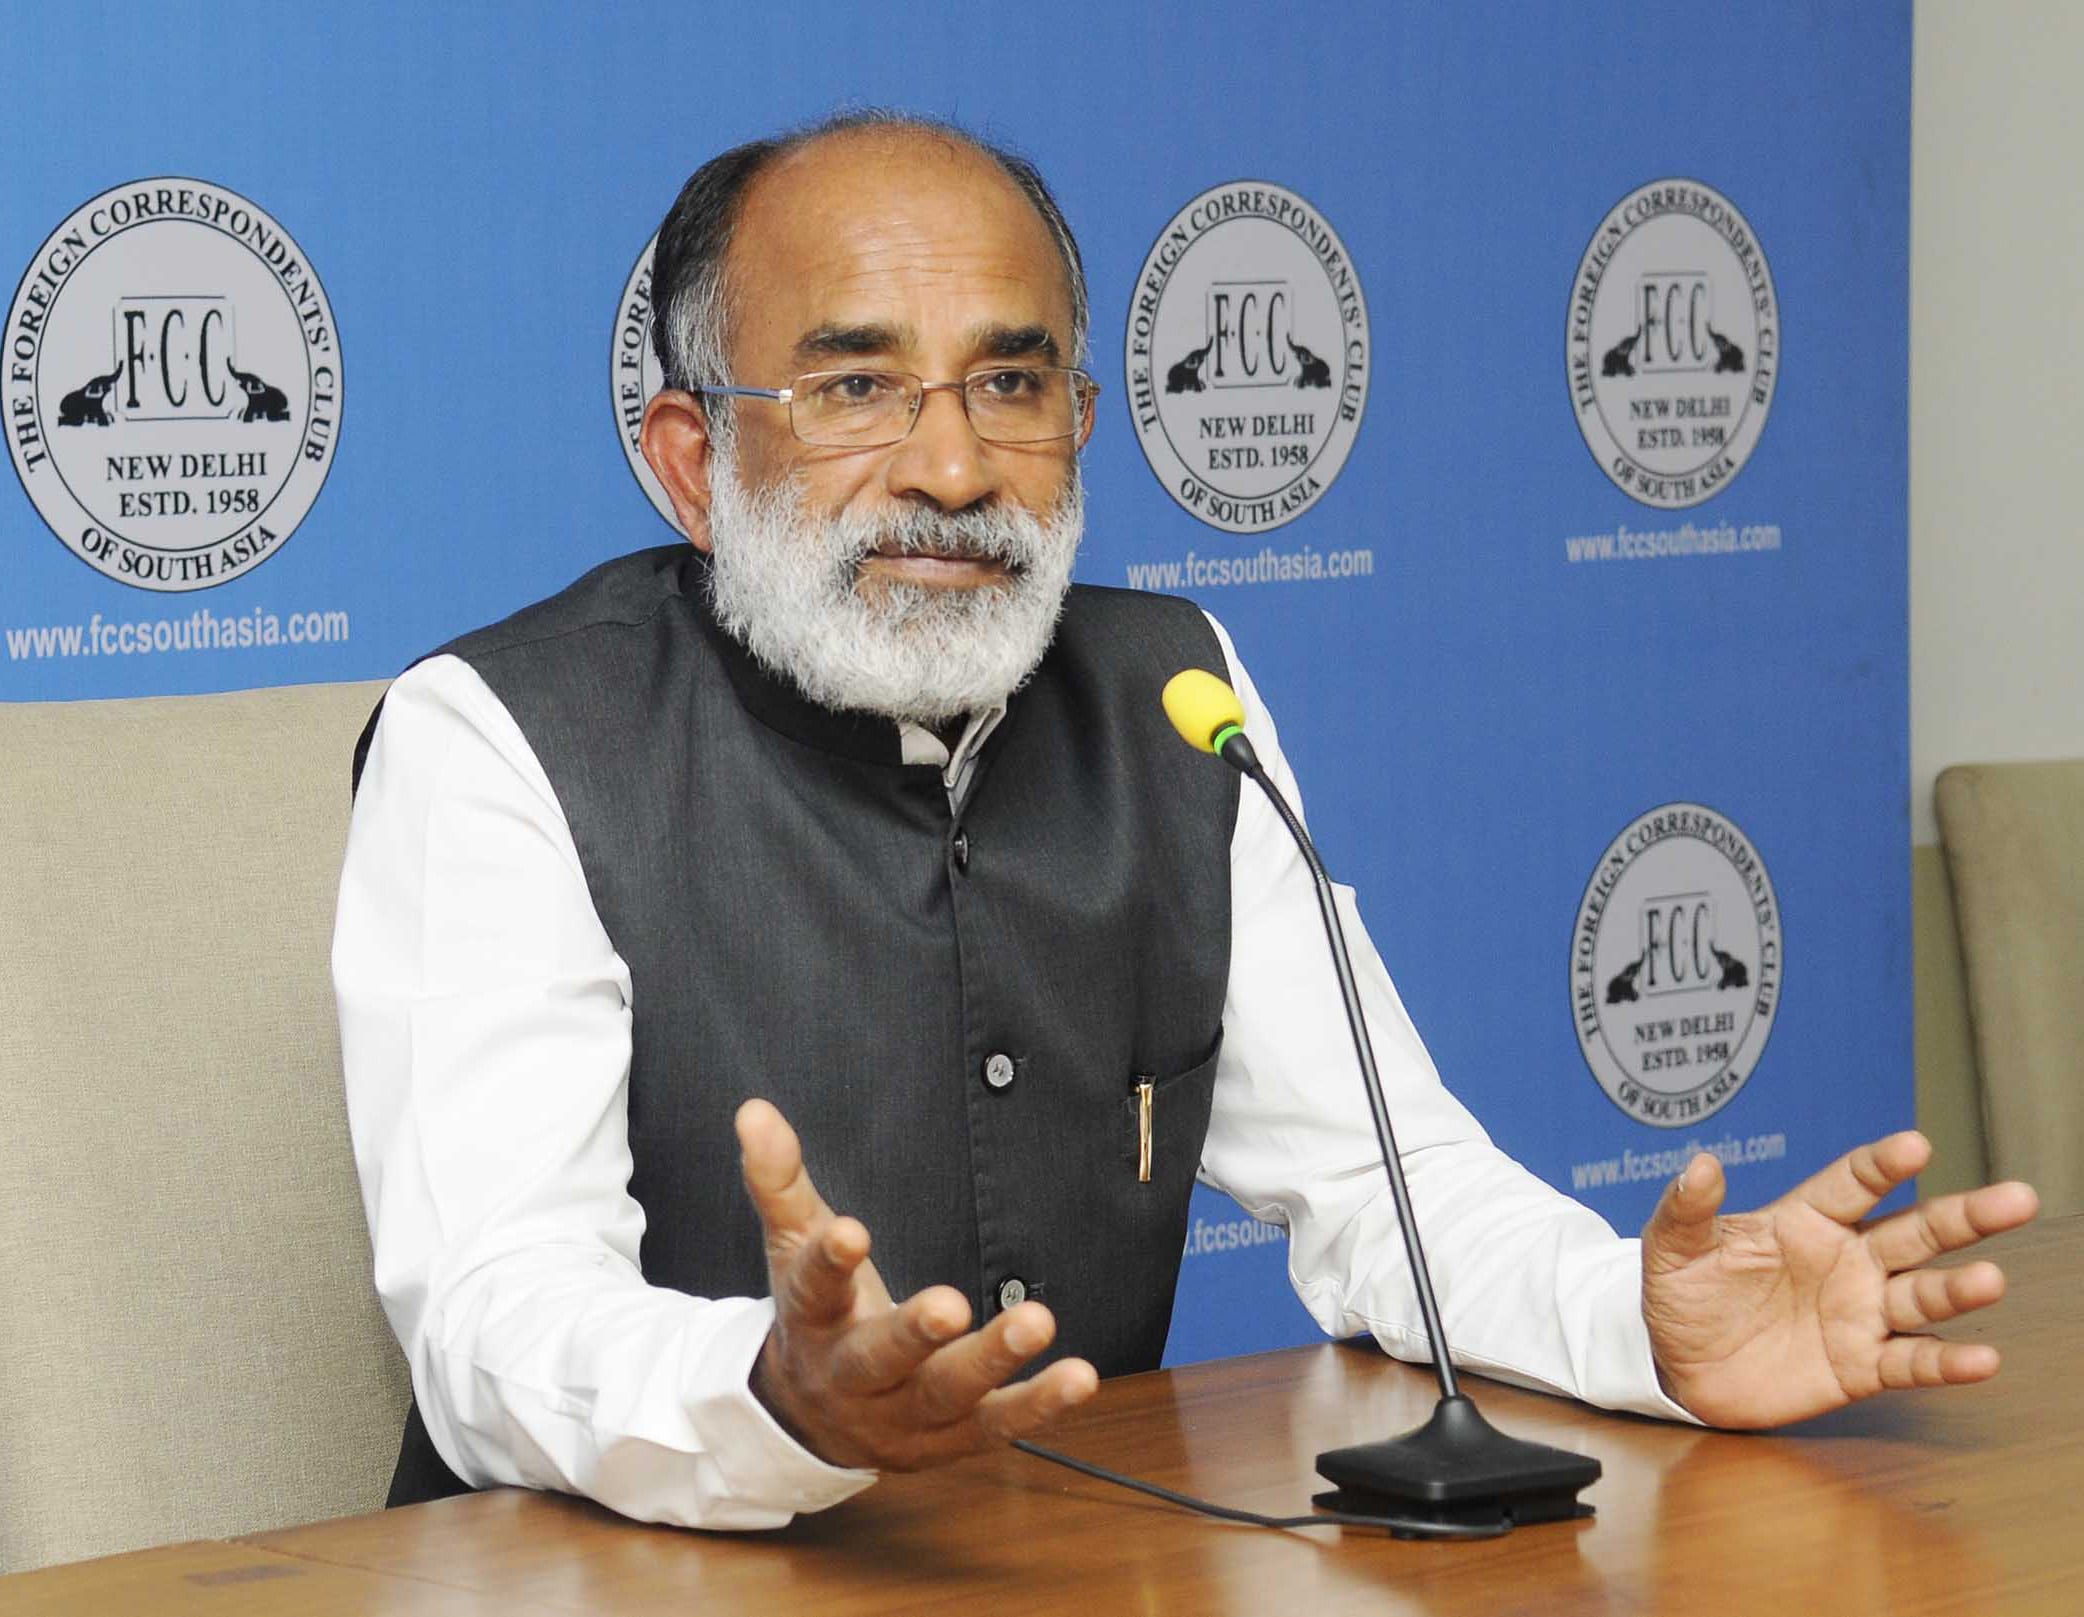 14.62 million Jobs created by Tourism sector in last 4 years: Minister K. J. Alphons